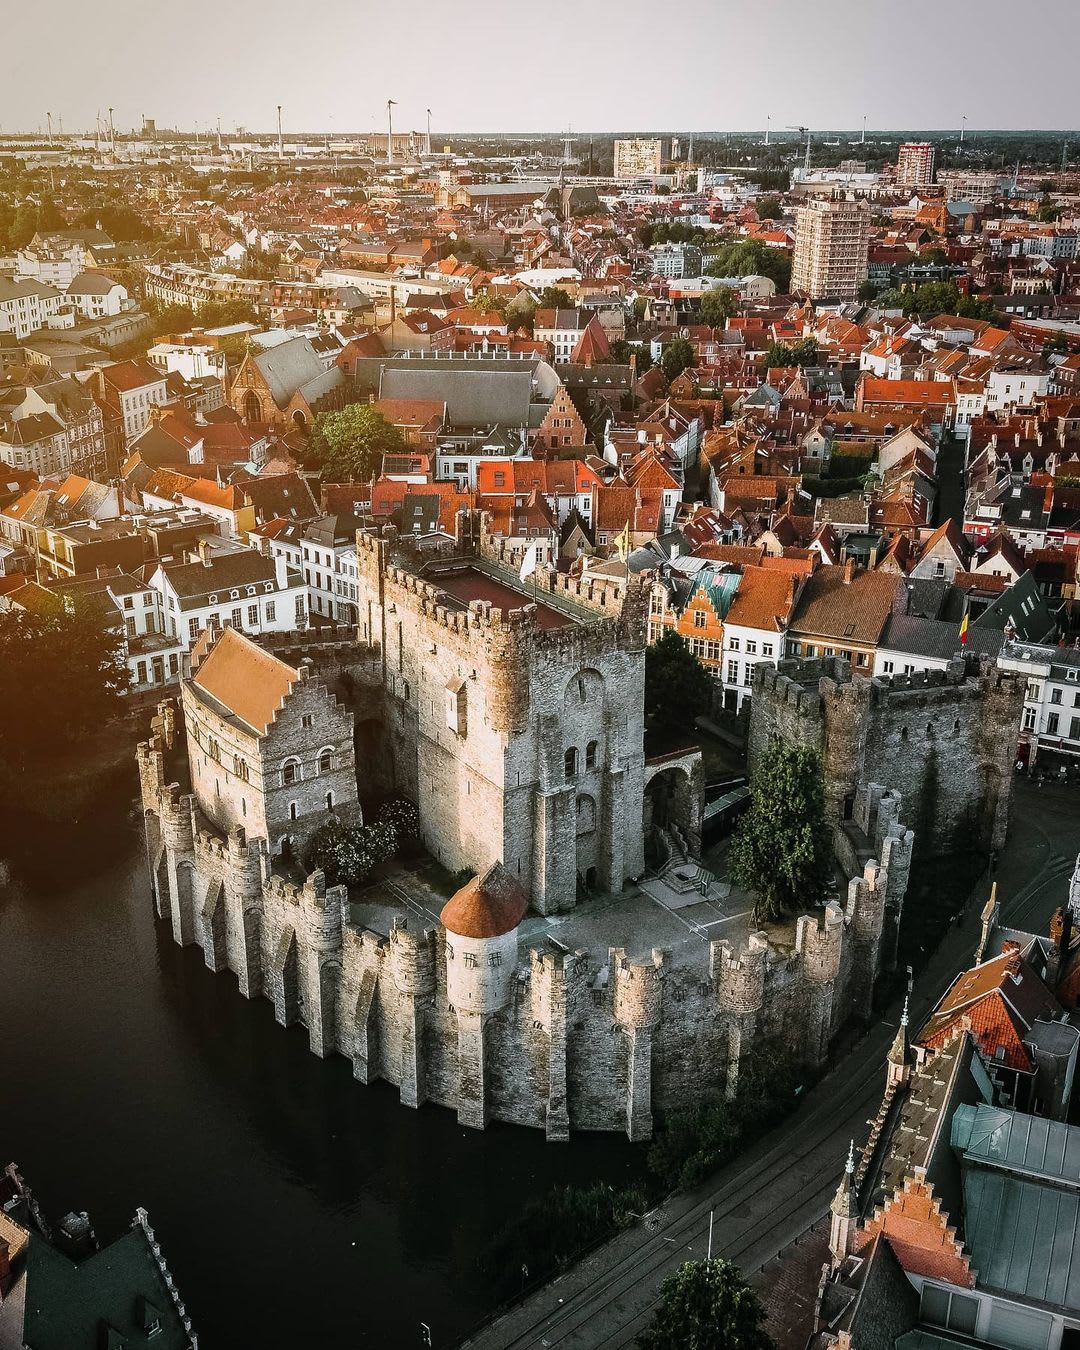 Gravensteen, a medieval castle that dates back to 1180 which was subsequently re-purposed as a court, prison, mint, cotton factory and now a museum located in the historic city center of Ghent, East Flanders, Belgium.